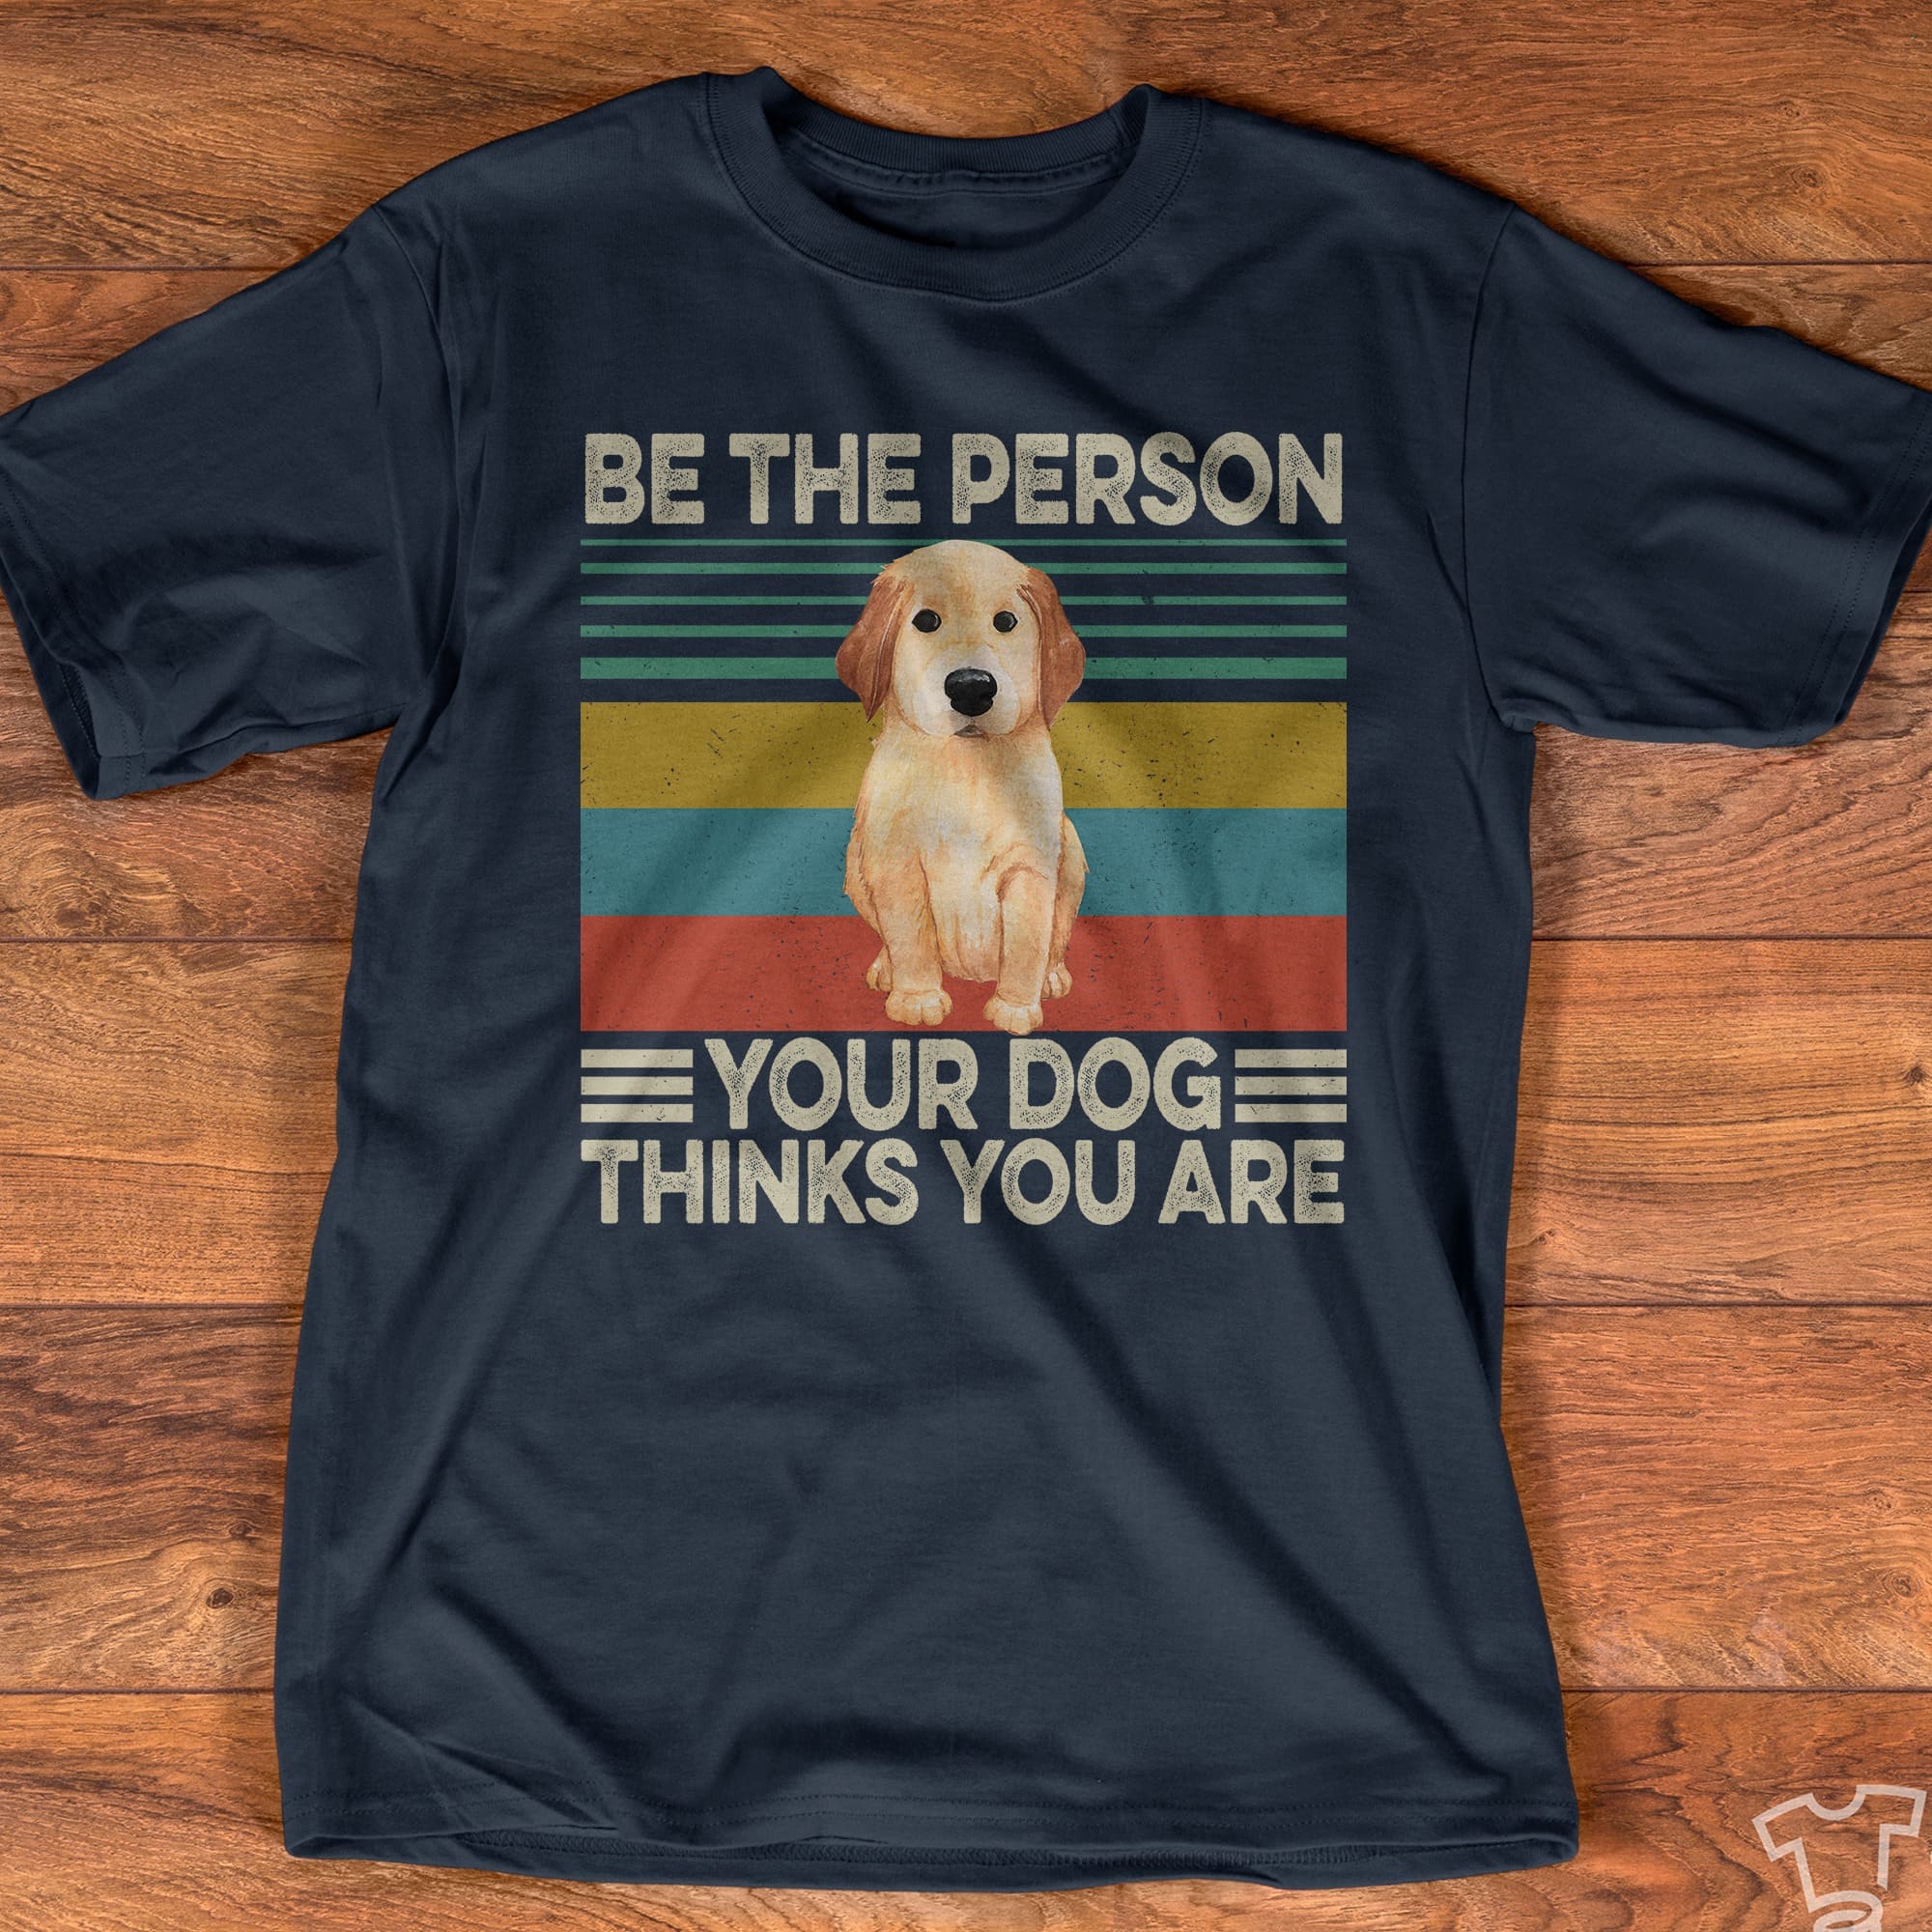 Be the person your dog thinks you are - Cute puppy, dog lover T-shirt